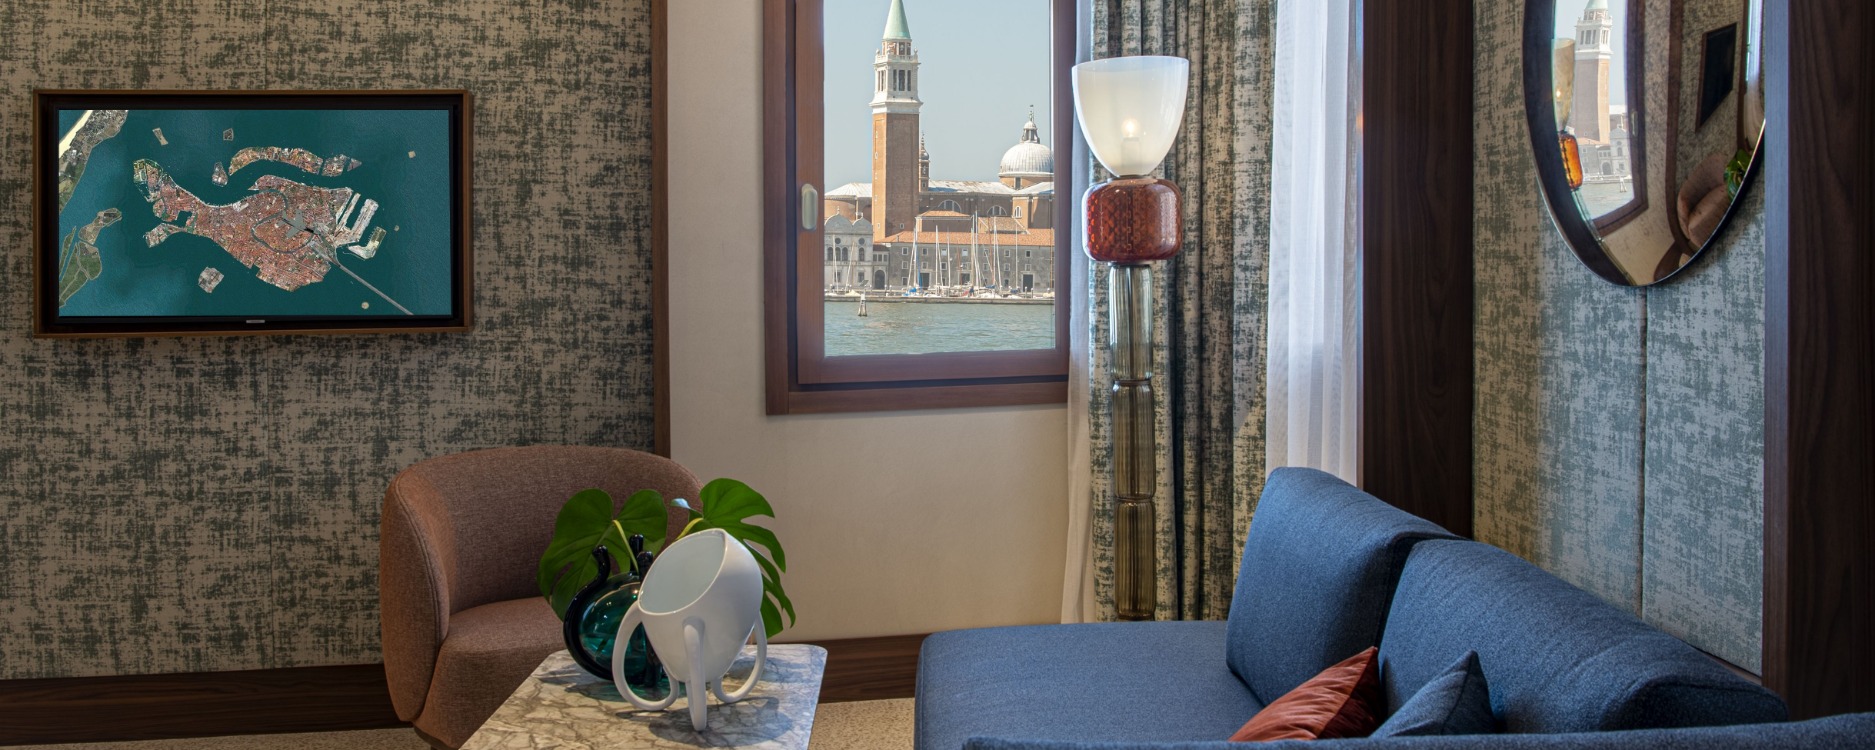 Check out Venice's soon-to-open Hotel Ca' di Dio - Travel CourierTravel